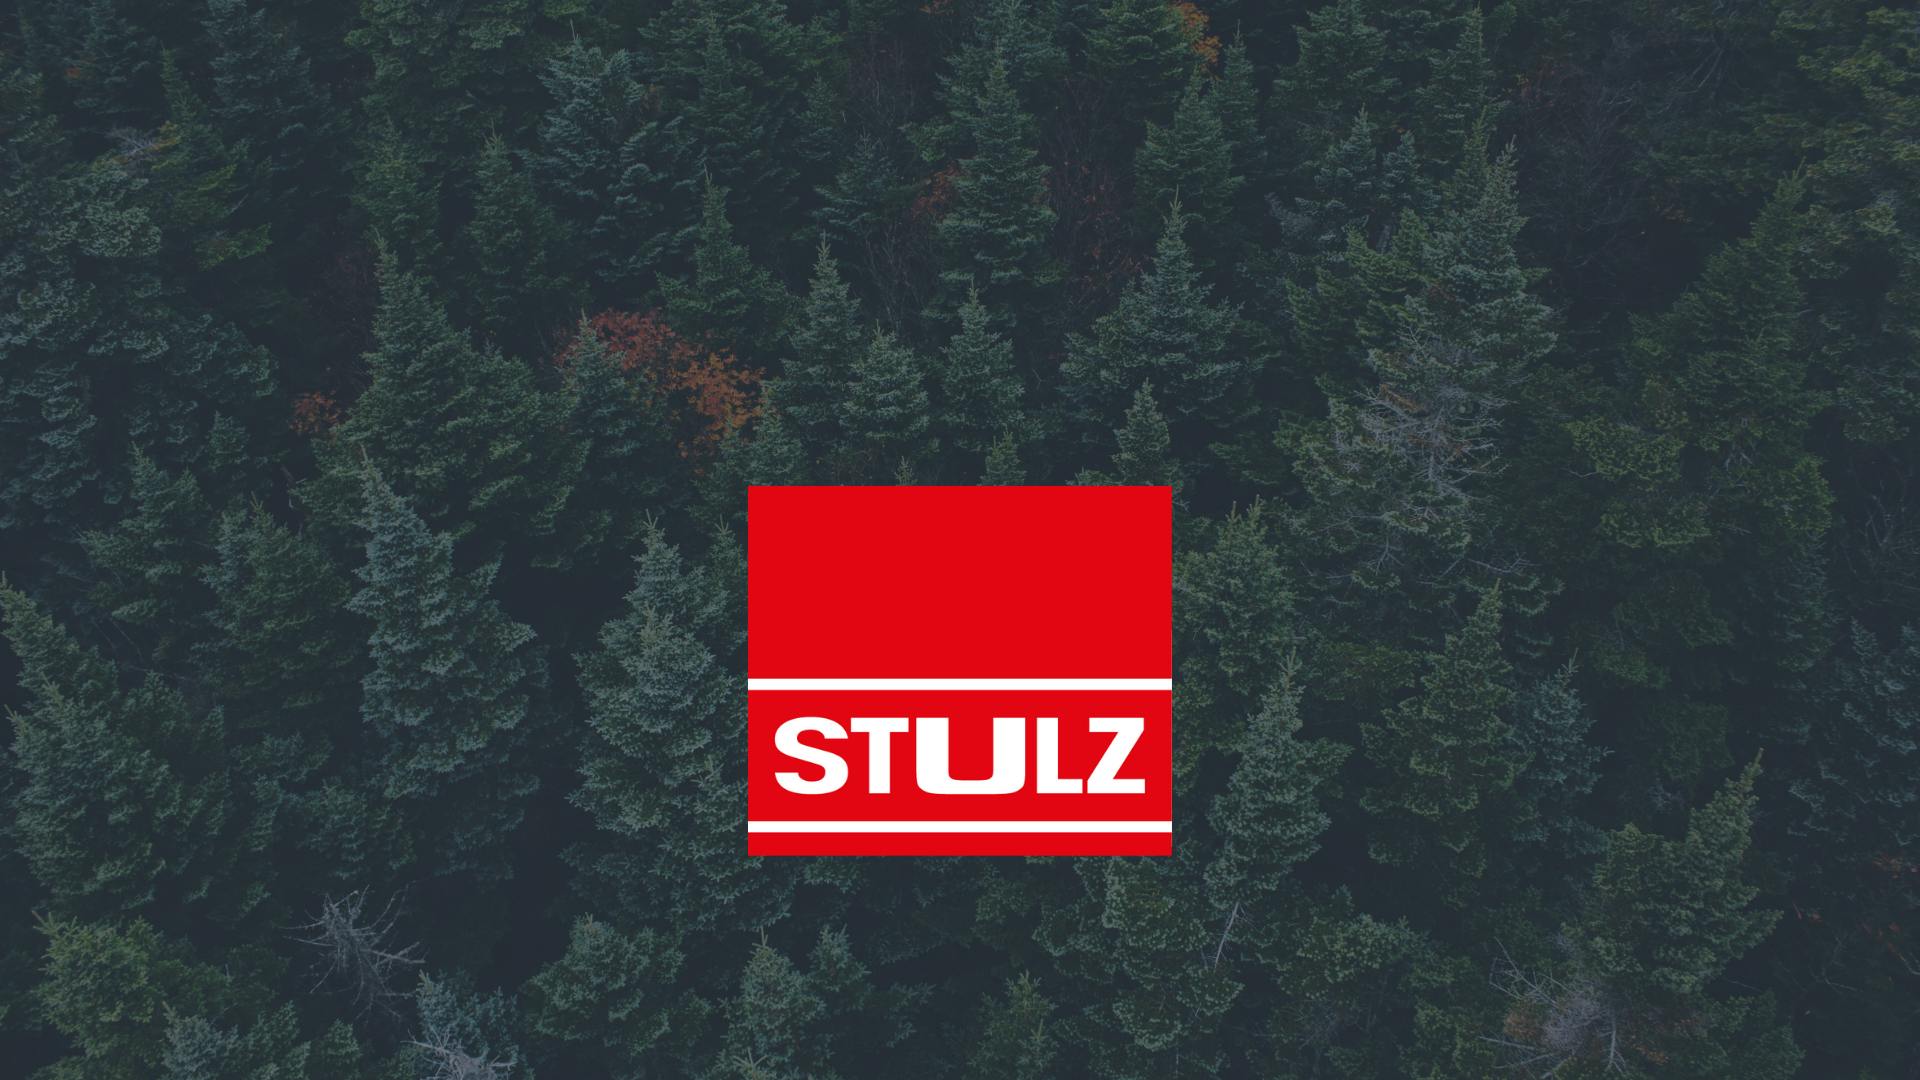 STULZ joins the Sustainable Digital Infrastructure Alliance as its latest member